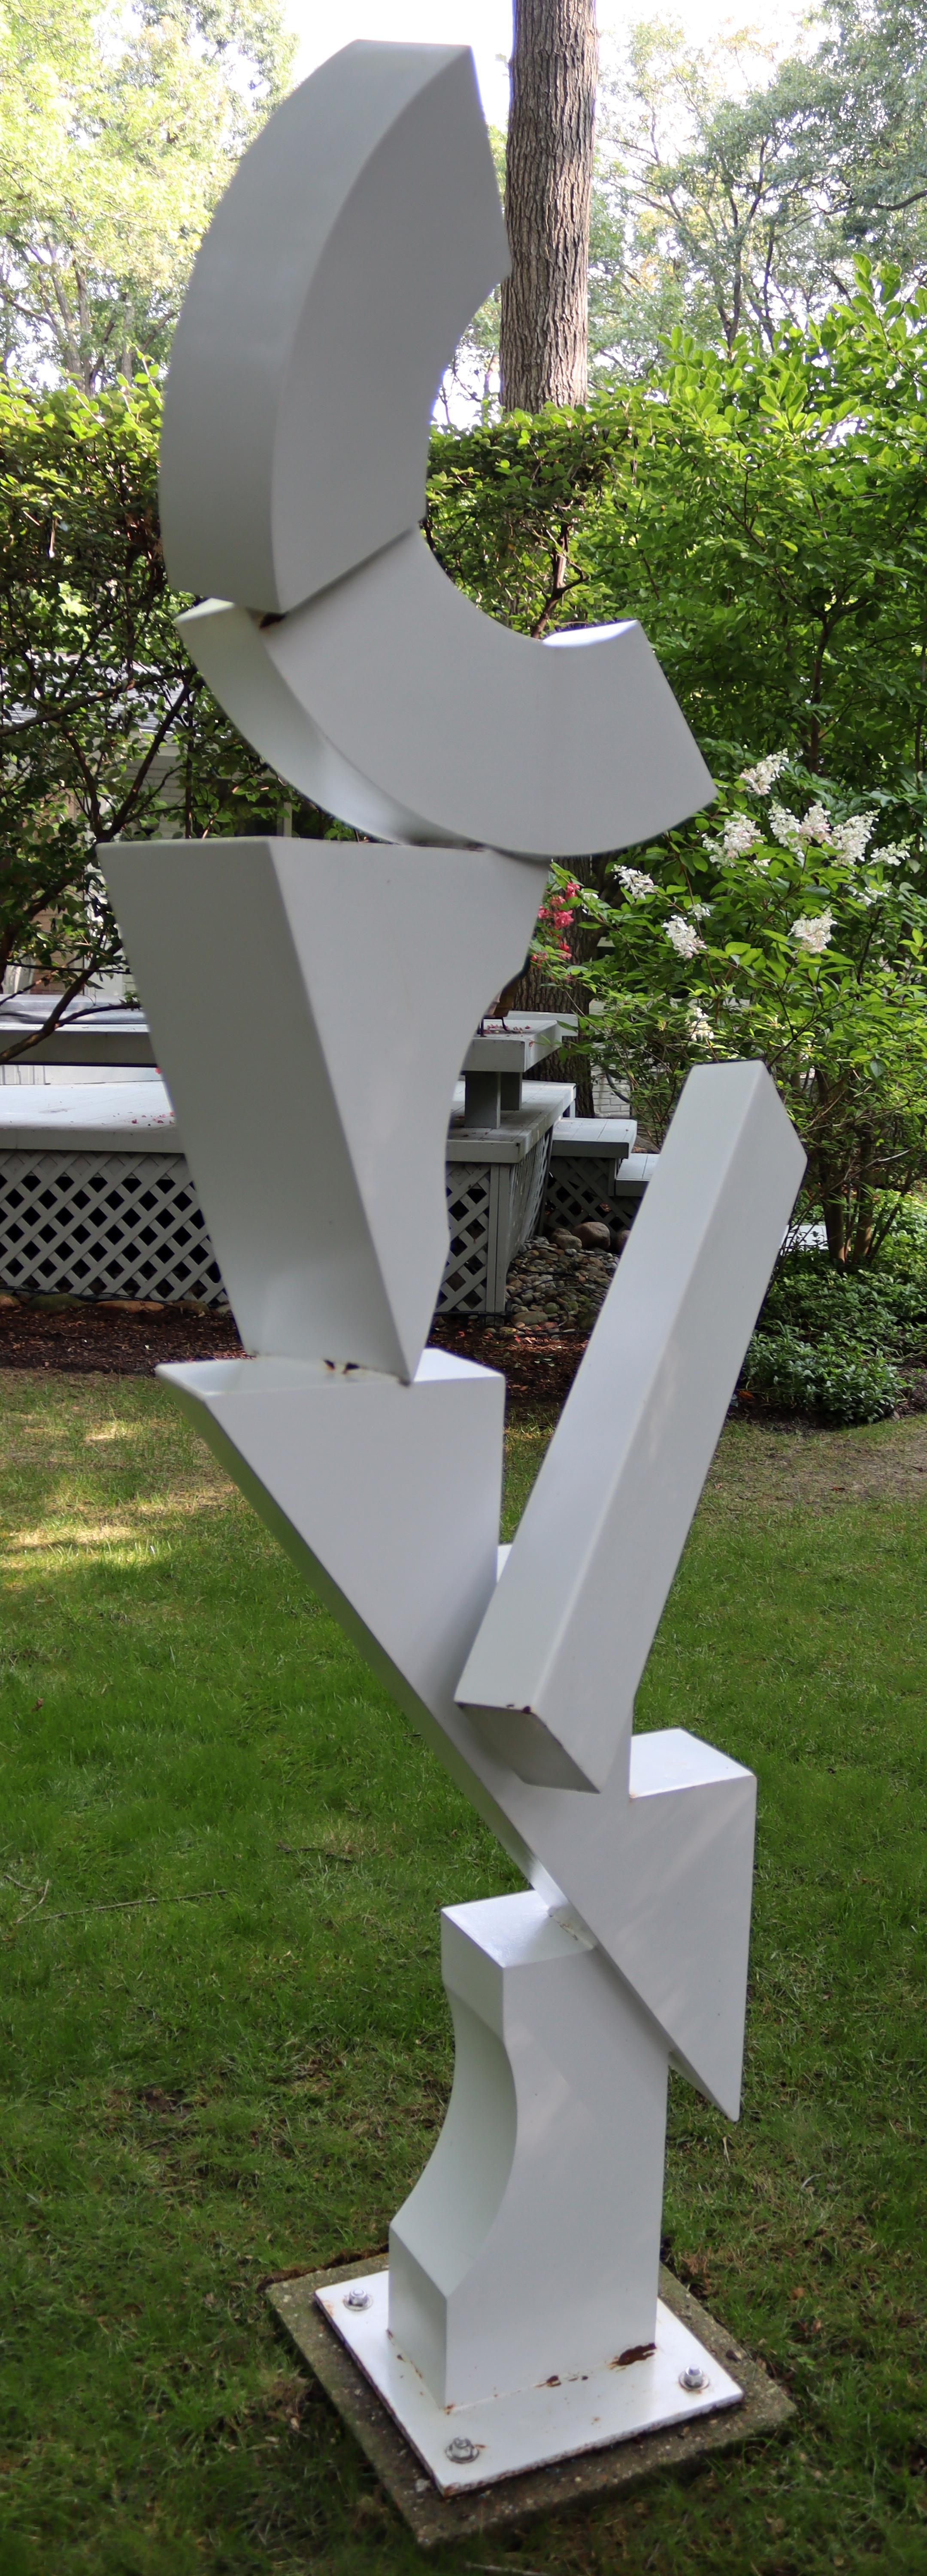 Late 20th Century Contemporary White Outdoor Metal Abstract Floor Sculpture Signed Haugevik 1990s